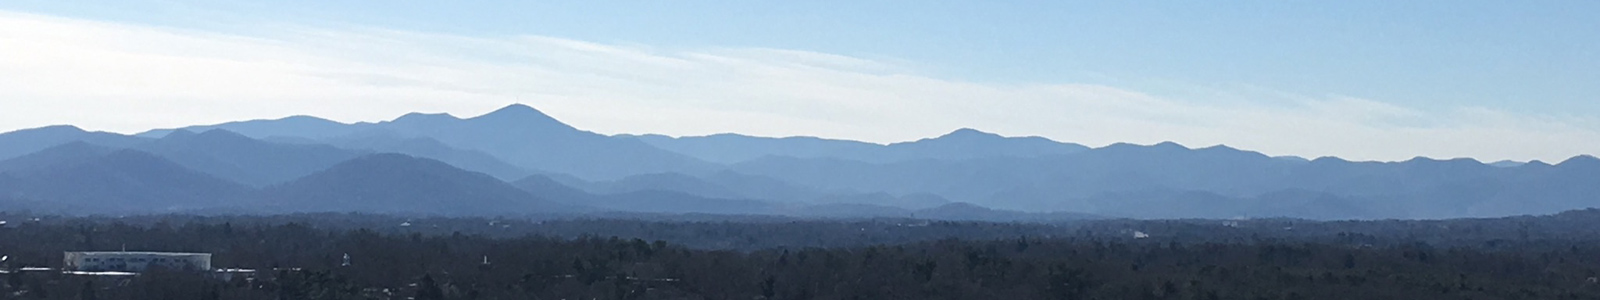 Build in Asheville - Get the Views